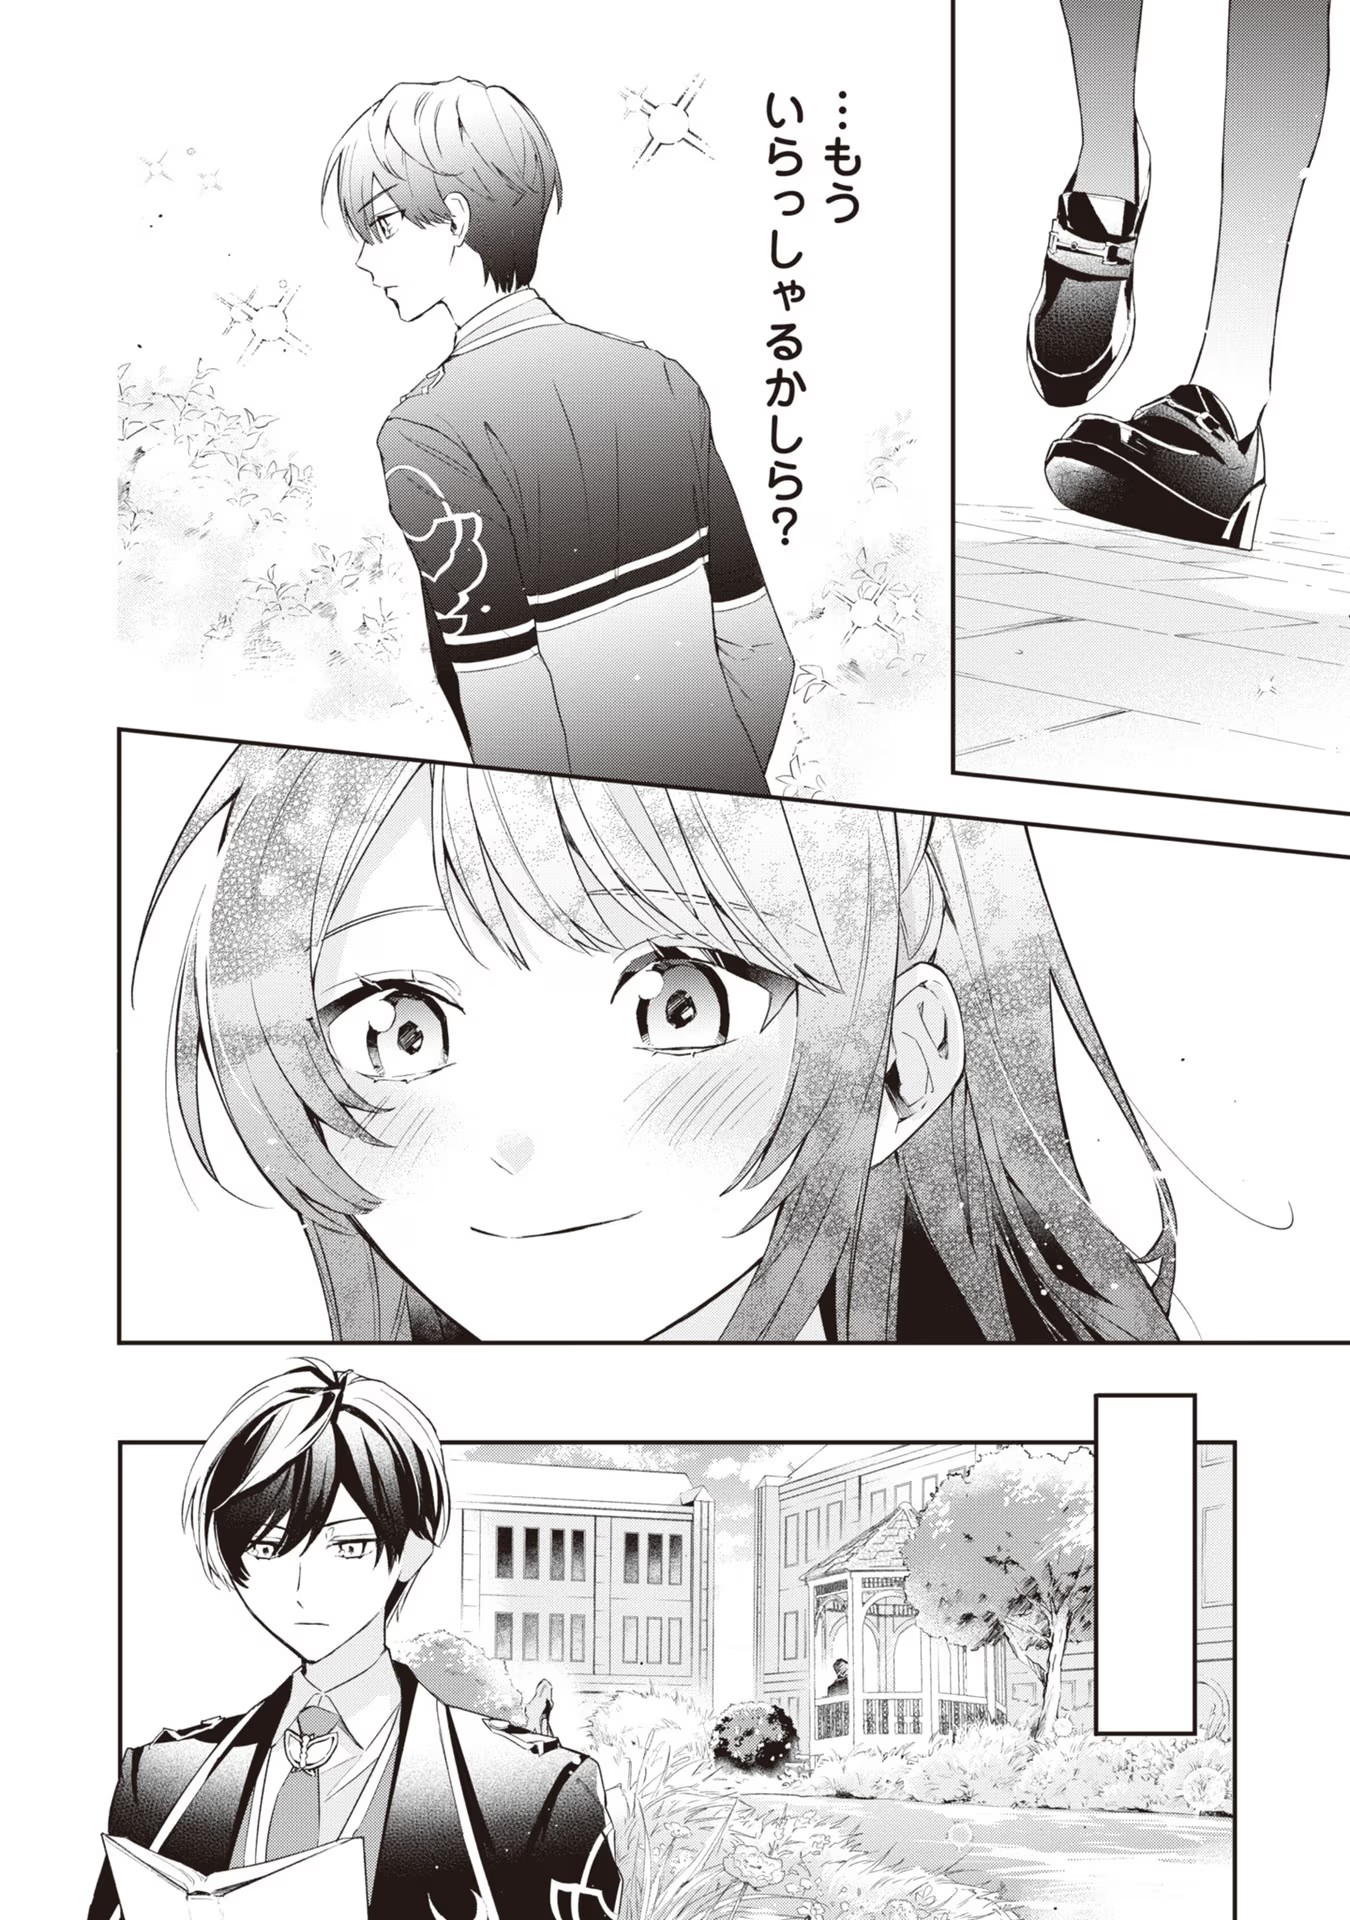 Kyou mo Reisoku to Kisoiatte Iru you desu If the Villainess and the Villain Were to Meet and Fall in Love ~It Seems the Shunned Heroine Who Formed a Contract With an Unnamed Spirit Is Fighting With the Nobleman Yet Again~ If the Villainess and Villain Met 第14話 - Page 16